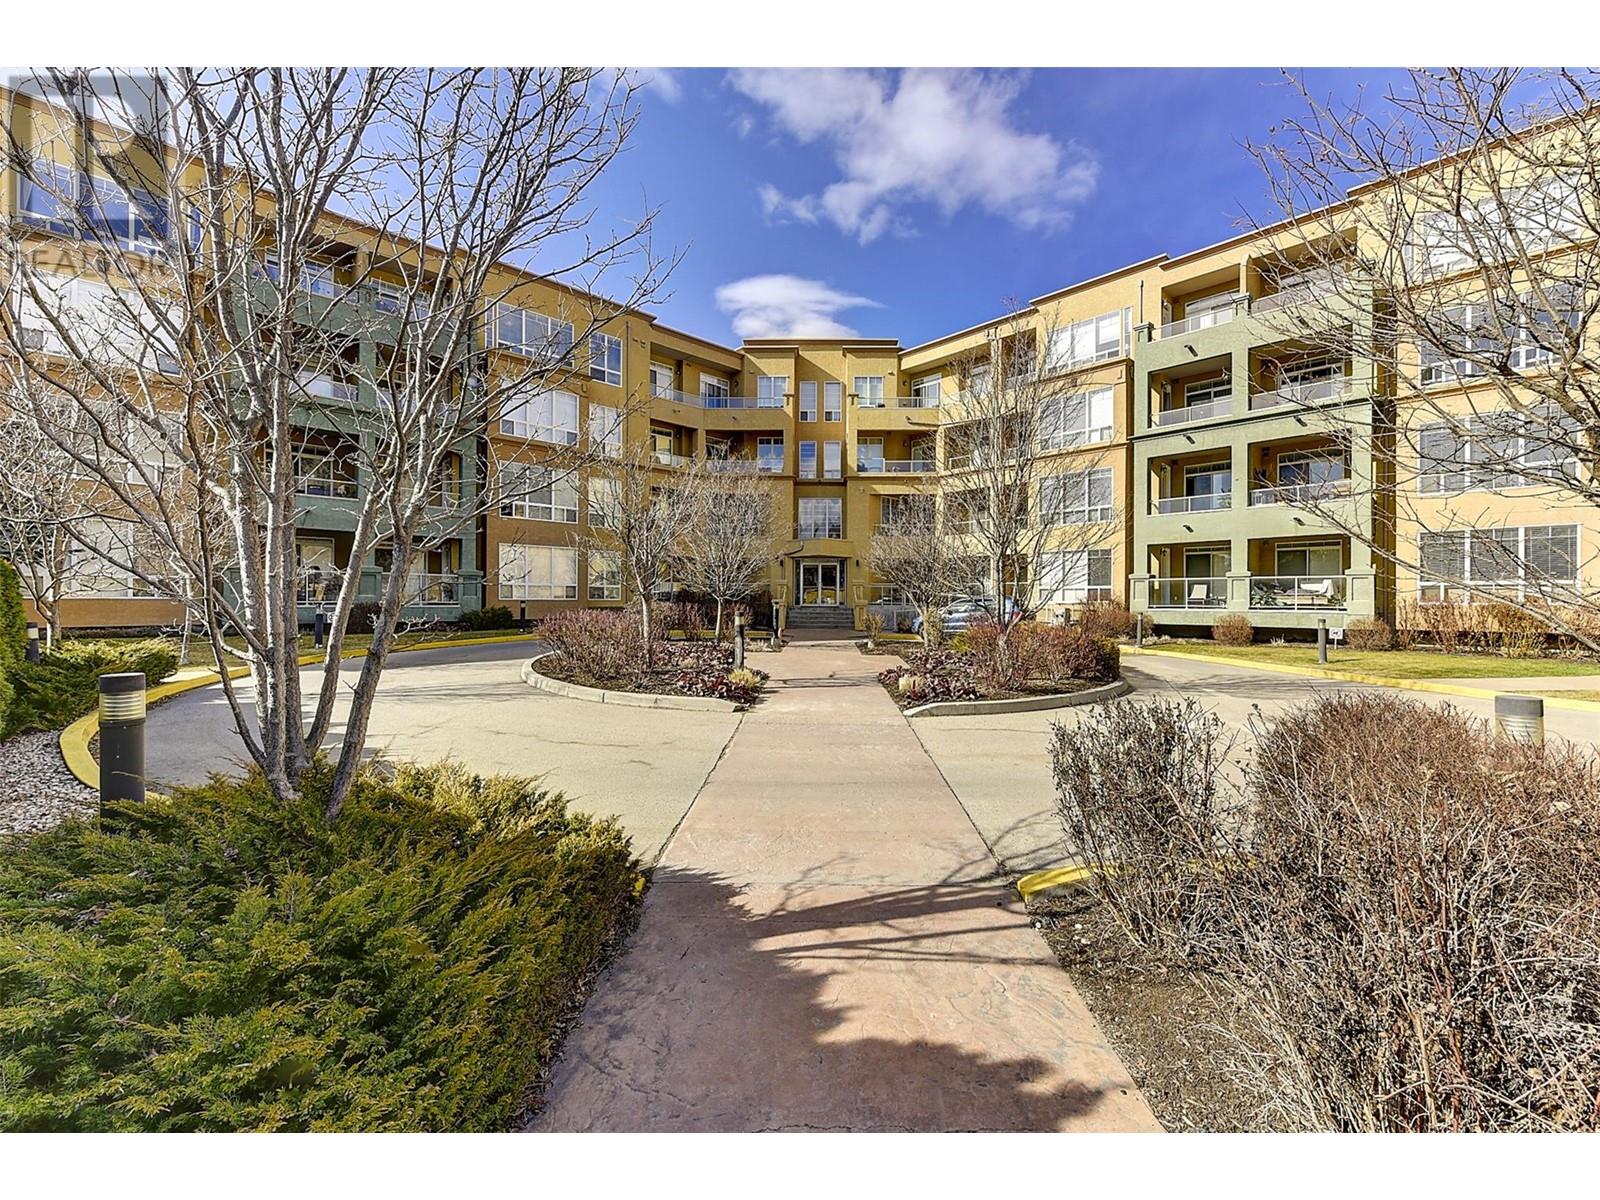 3550 Woodsdale Road Unit# 302 Lake Country